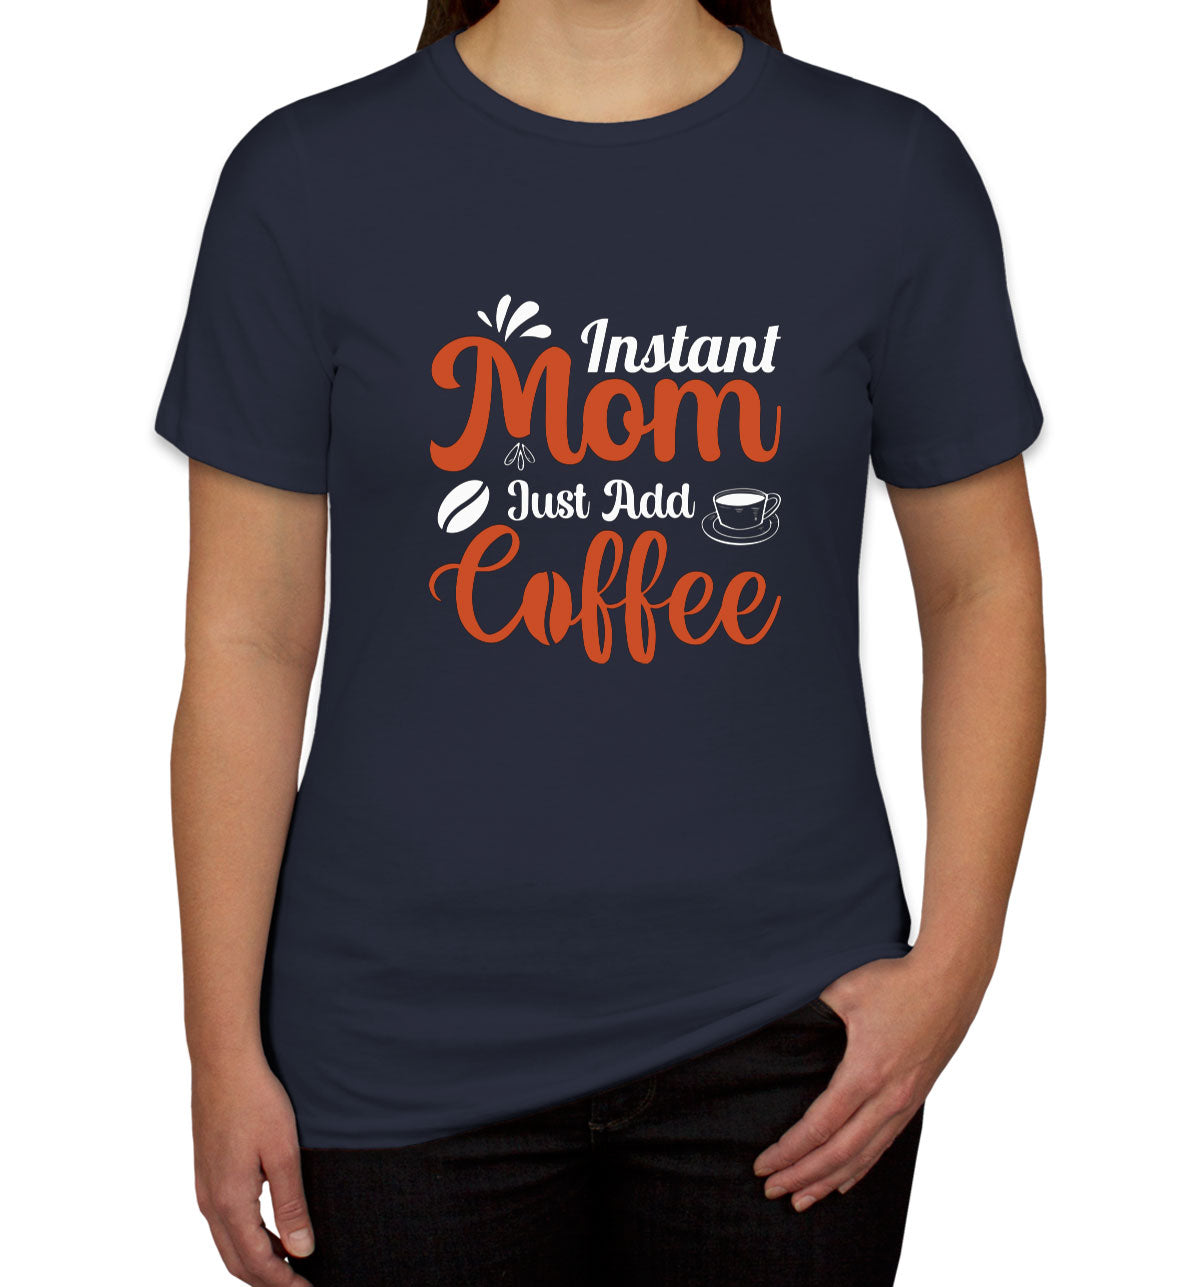 Instant Mom Just Add Coffee Women's T-shirt